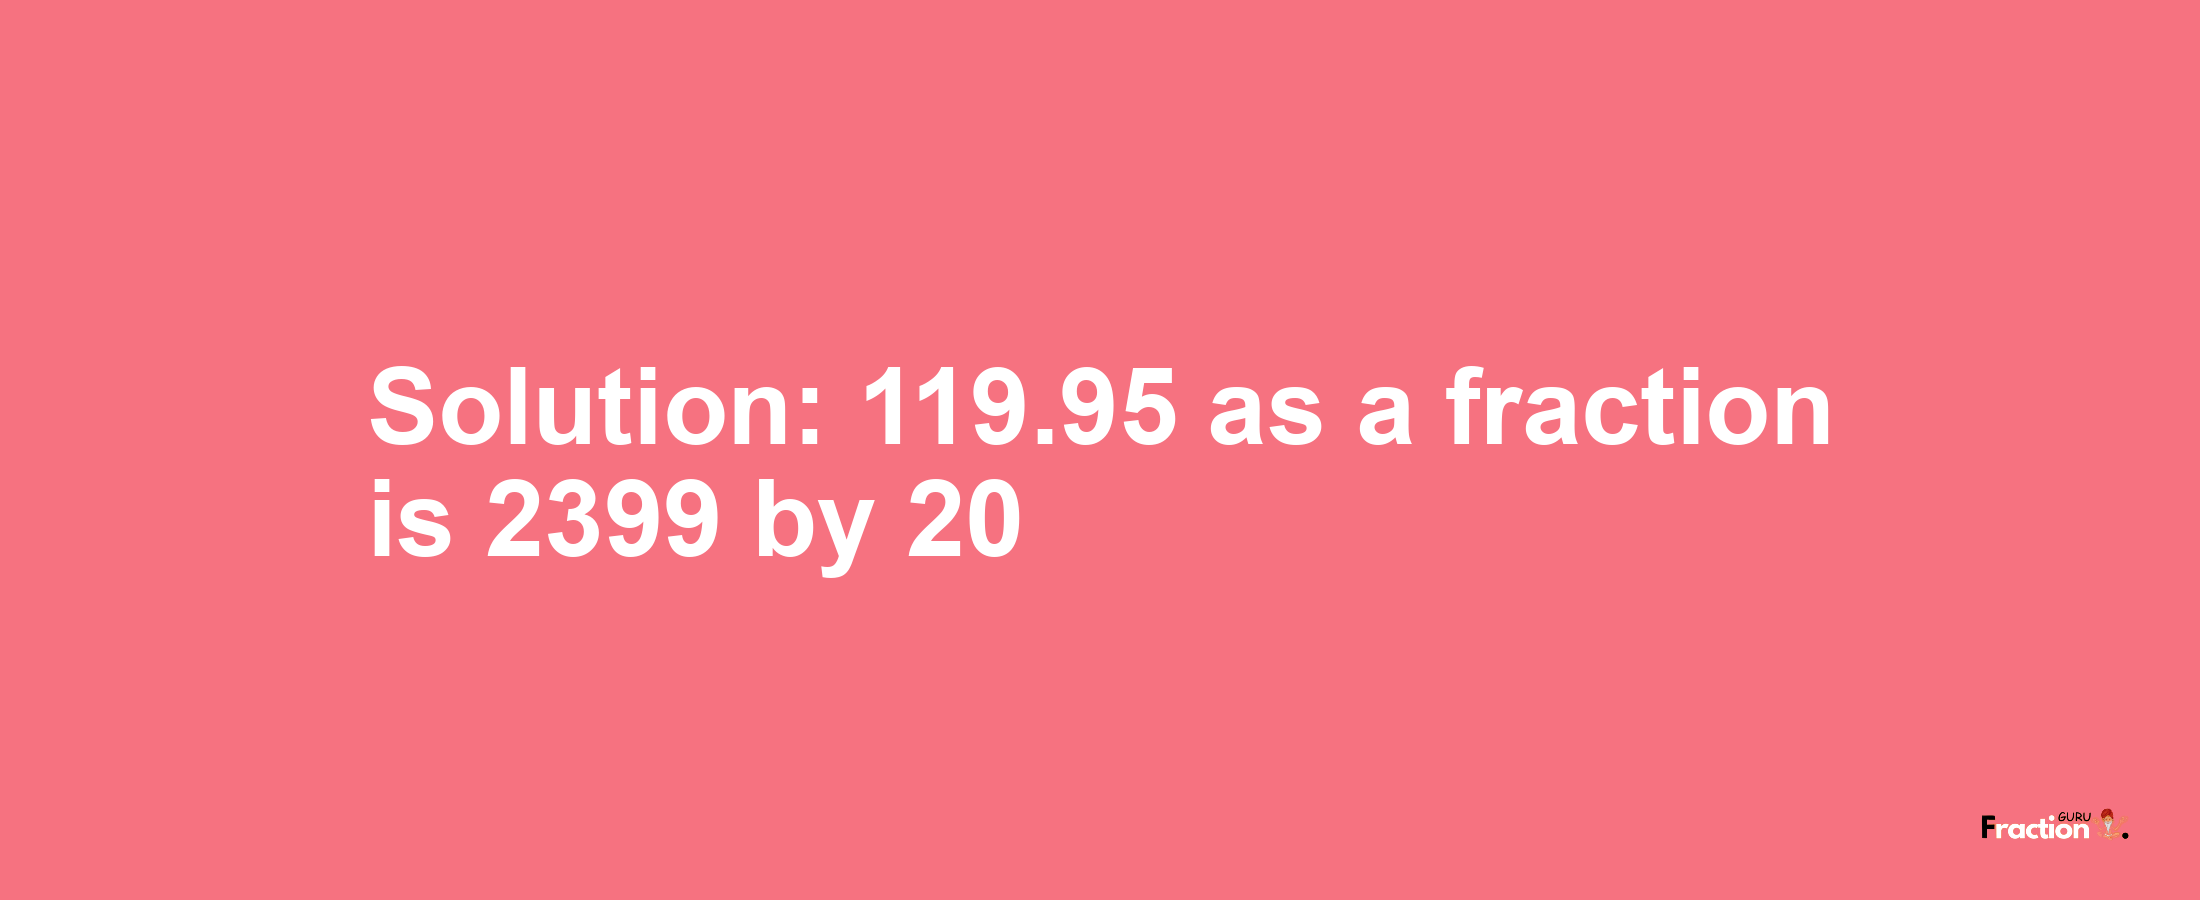 Solution:119.95 as a fraction is 2399/20